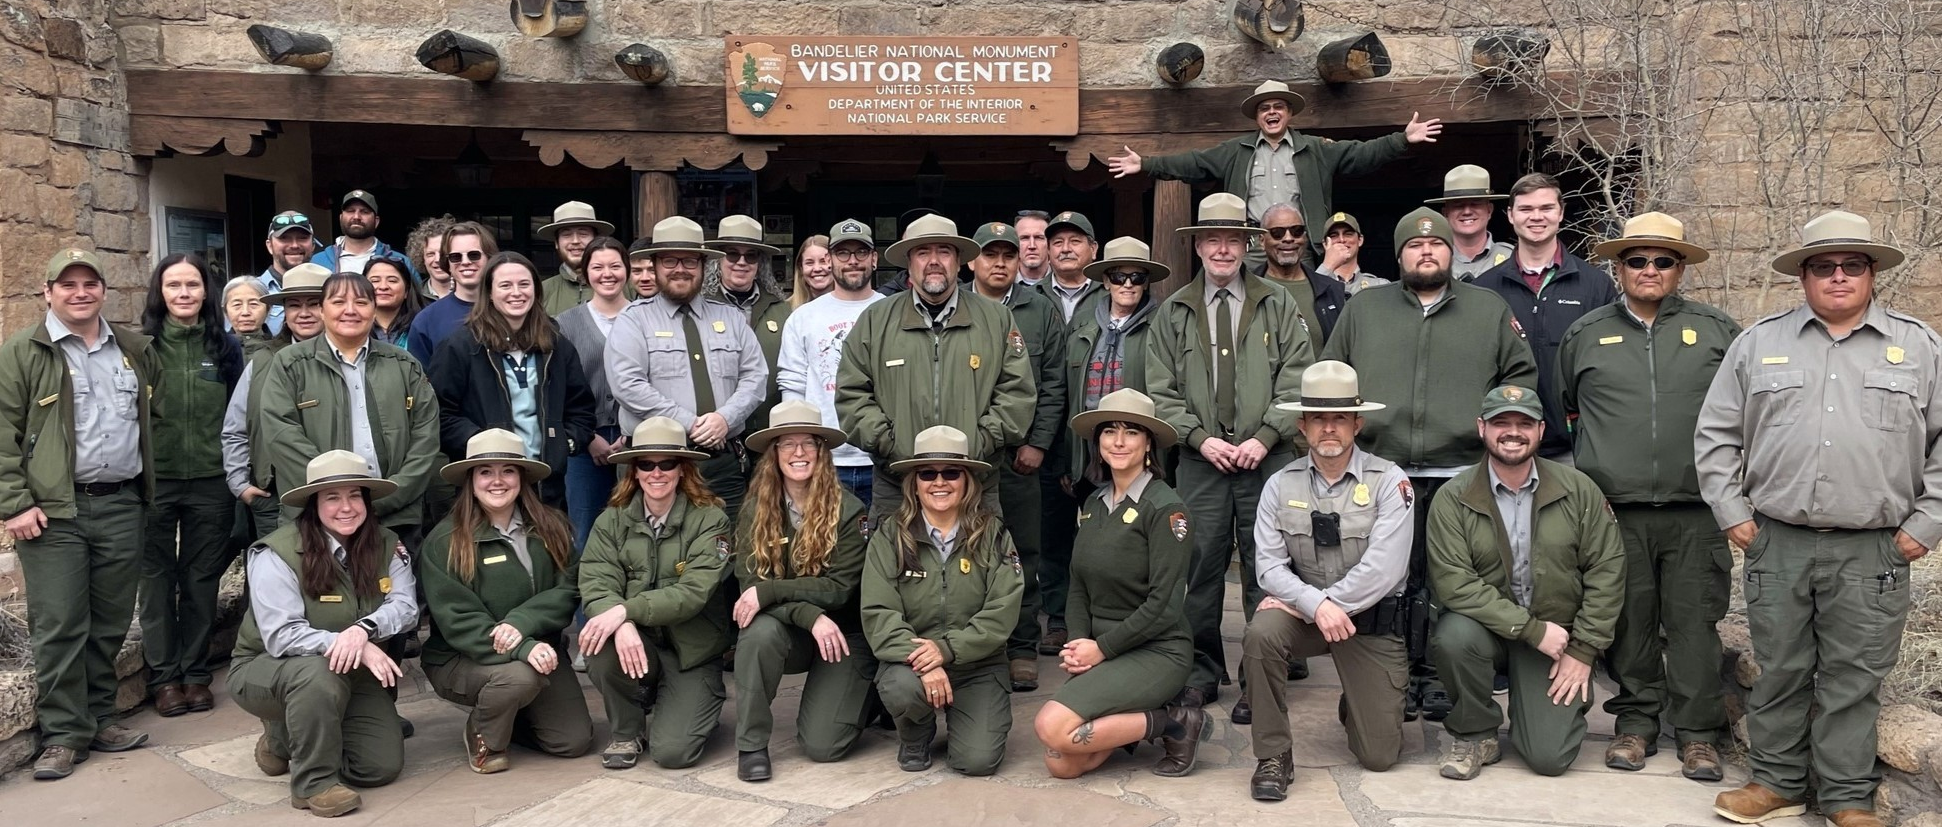 A group of uniformed employees stand in front of a visitor center